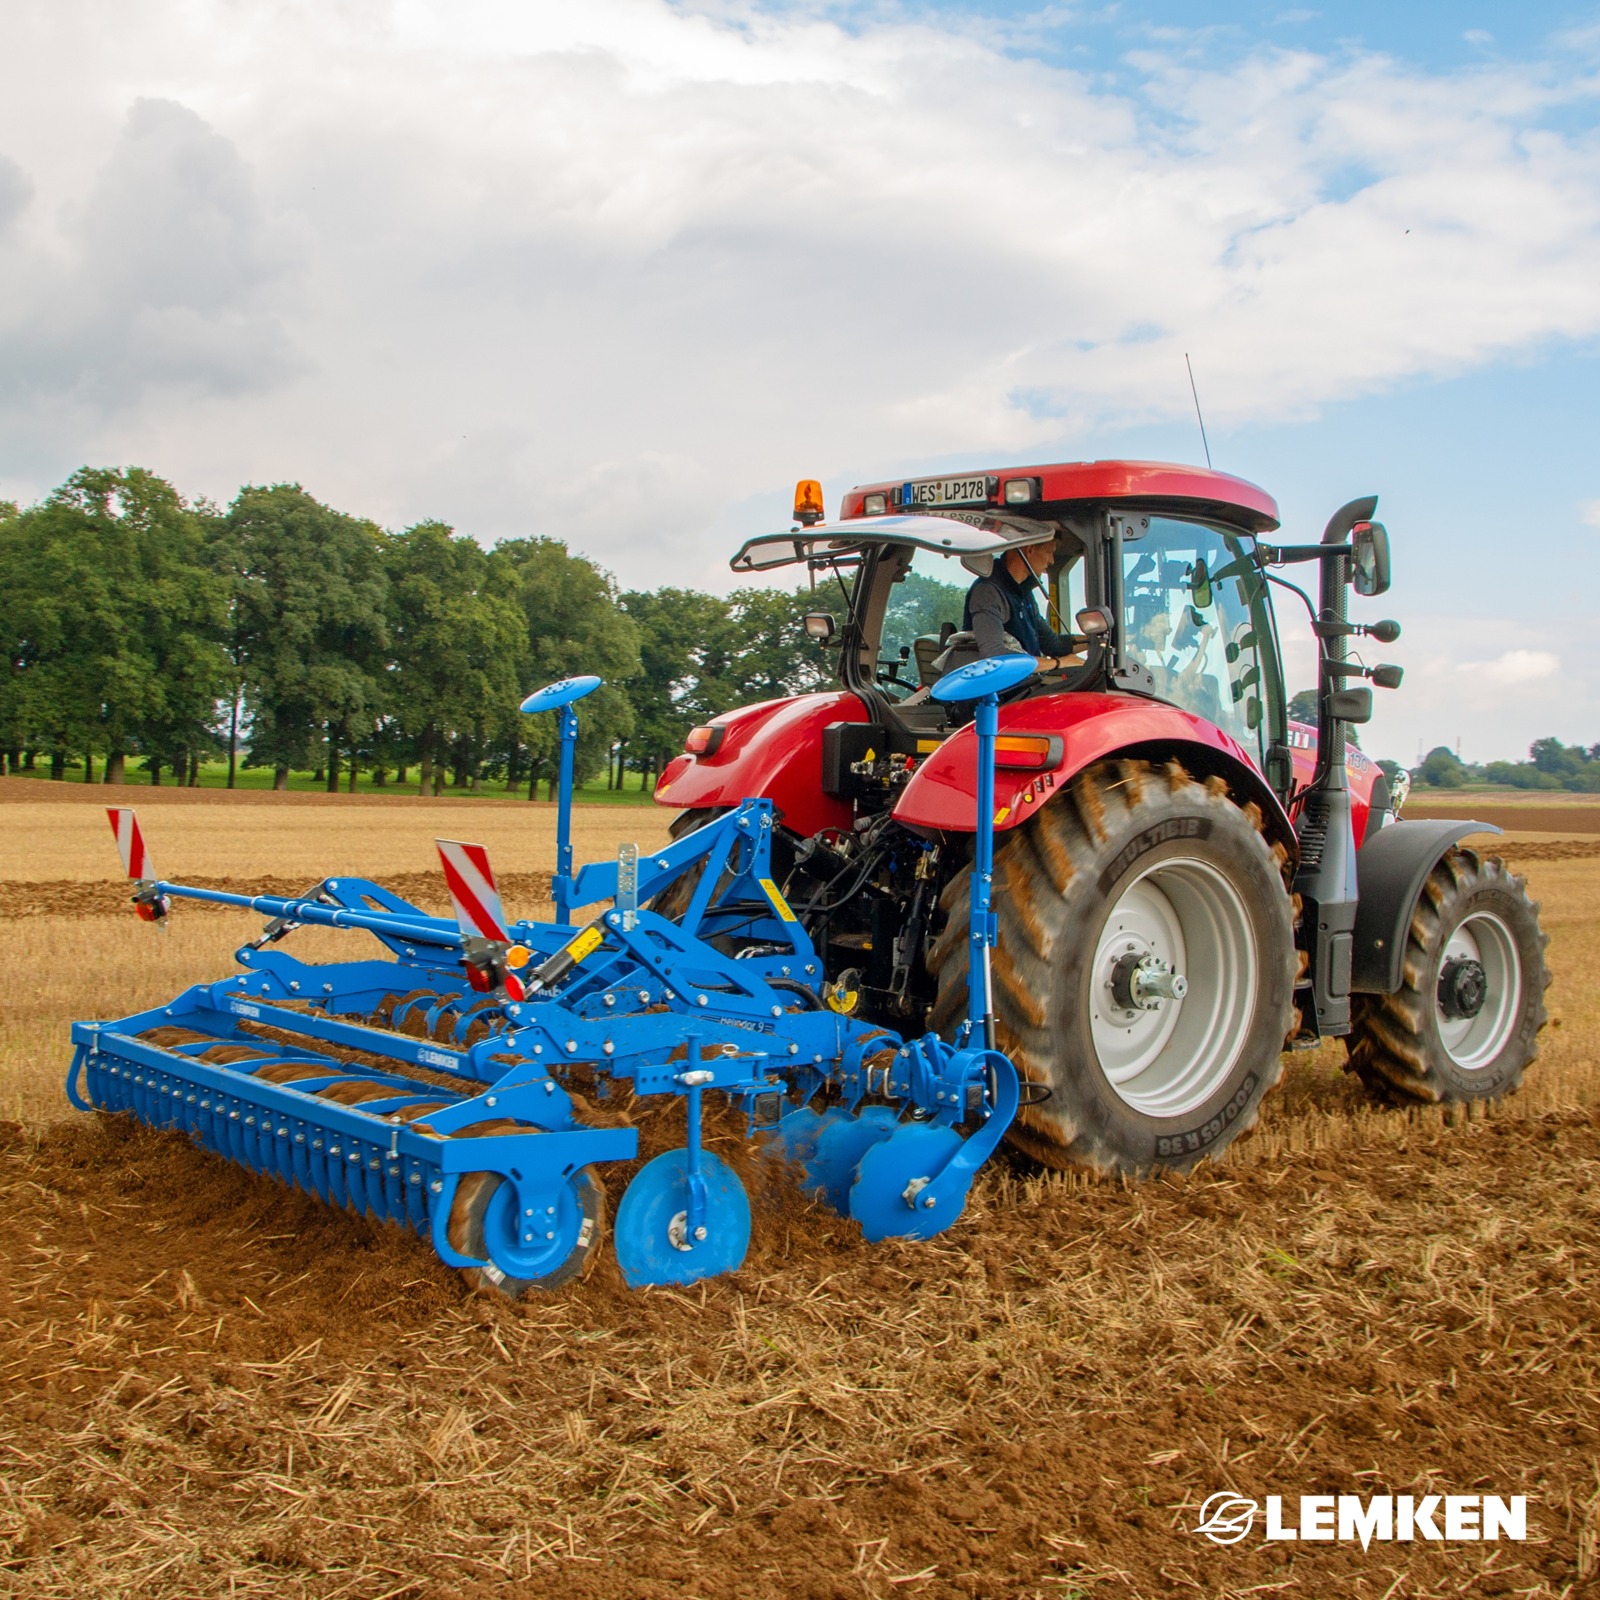 Our compact disc harrows Heliodor and Rubin provide optimum preparation for your soil. Our Heliodor ist the perfect...